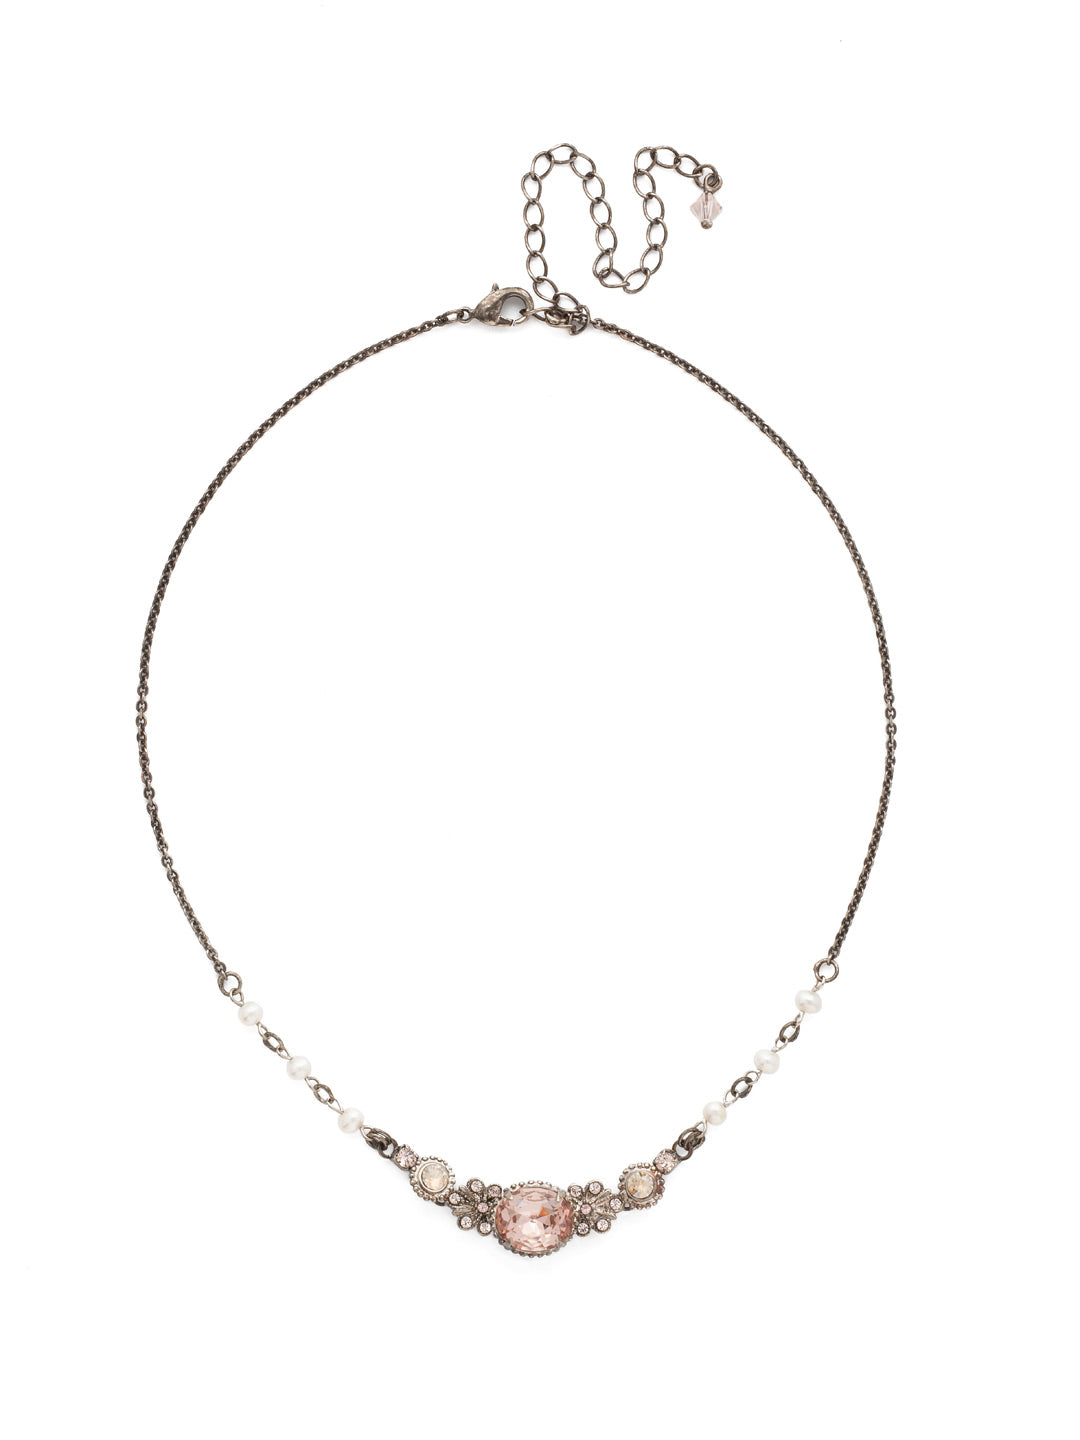 Vintage Inspired Tennis Necklace - NDP2ASSBL - <p>This necklaces has a pearl detailed chain. From Sorrelli's Satin Blush collection in our Antique Silver-tone finish.</p>